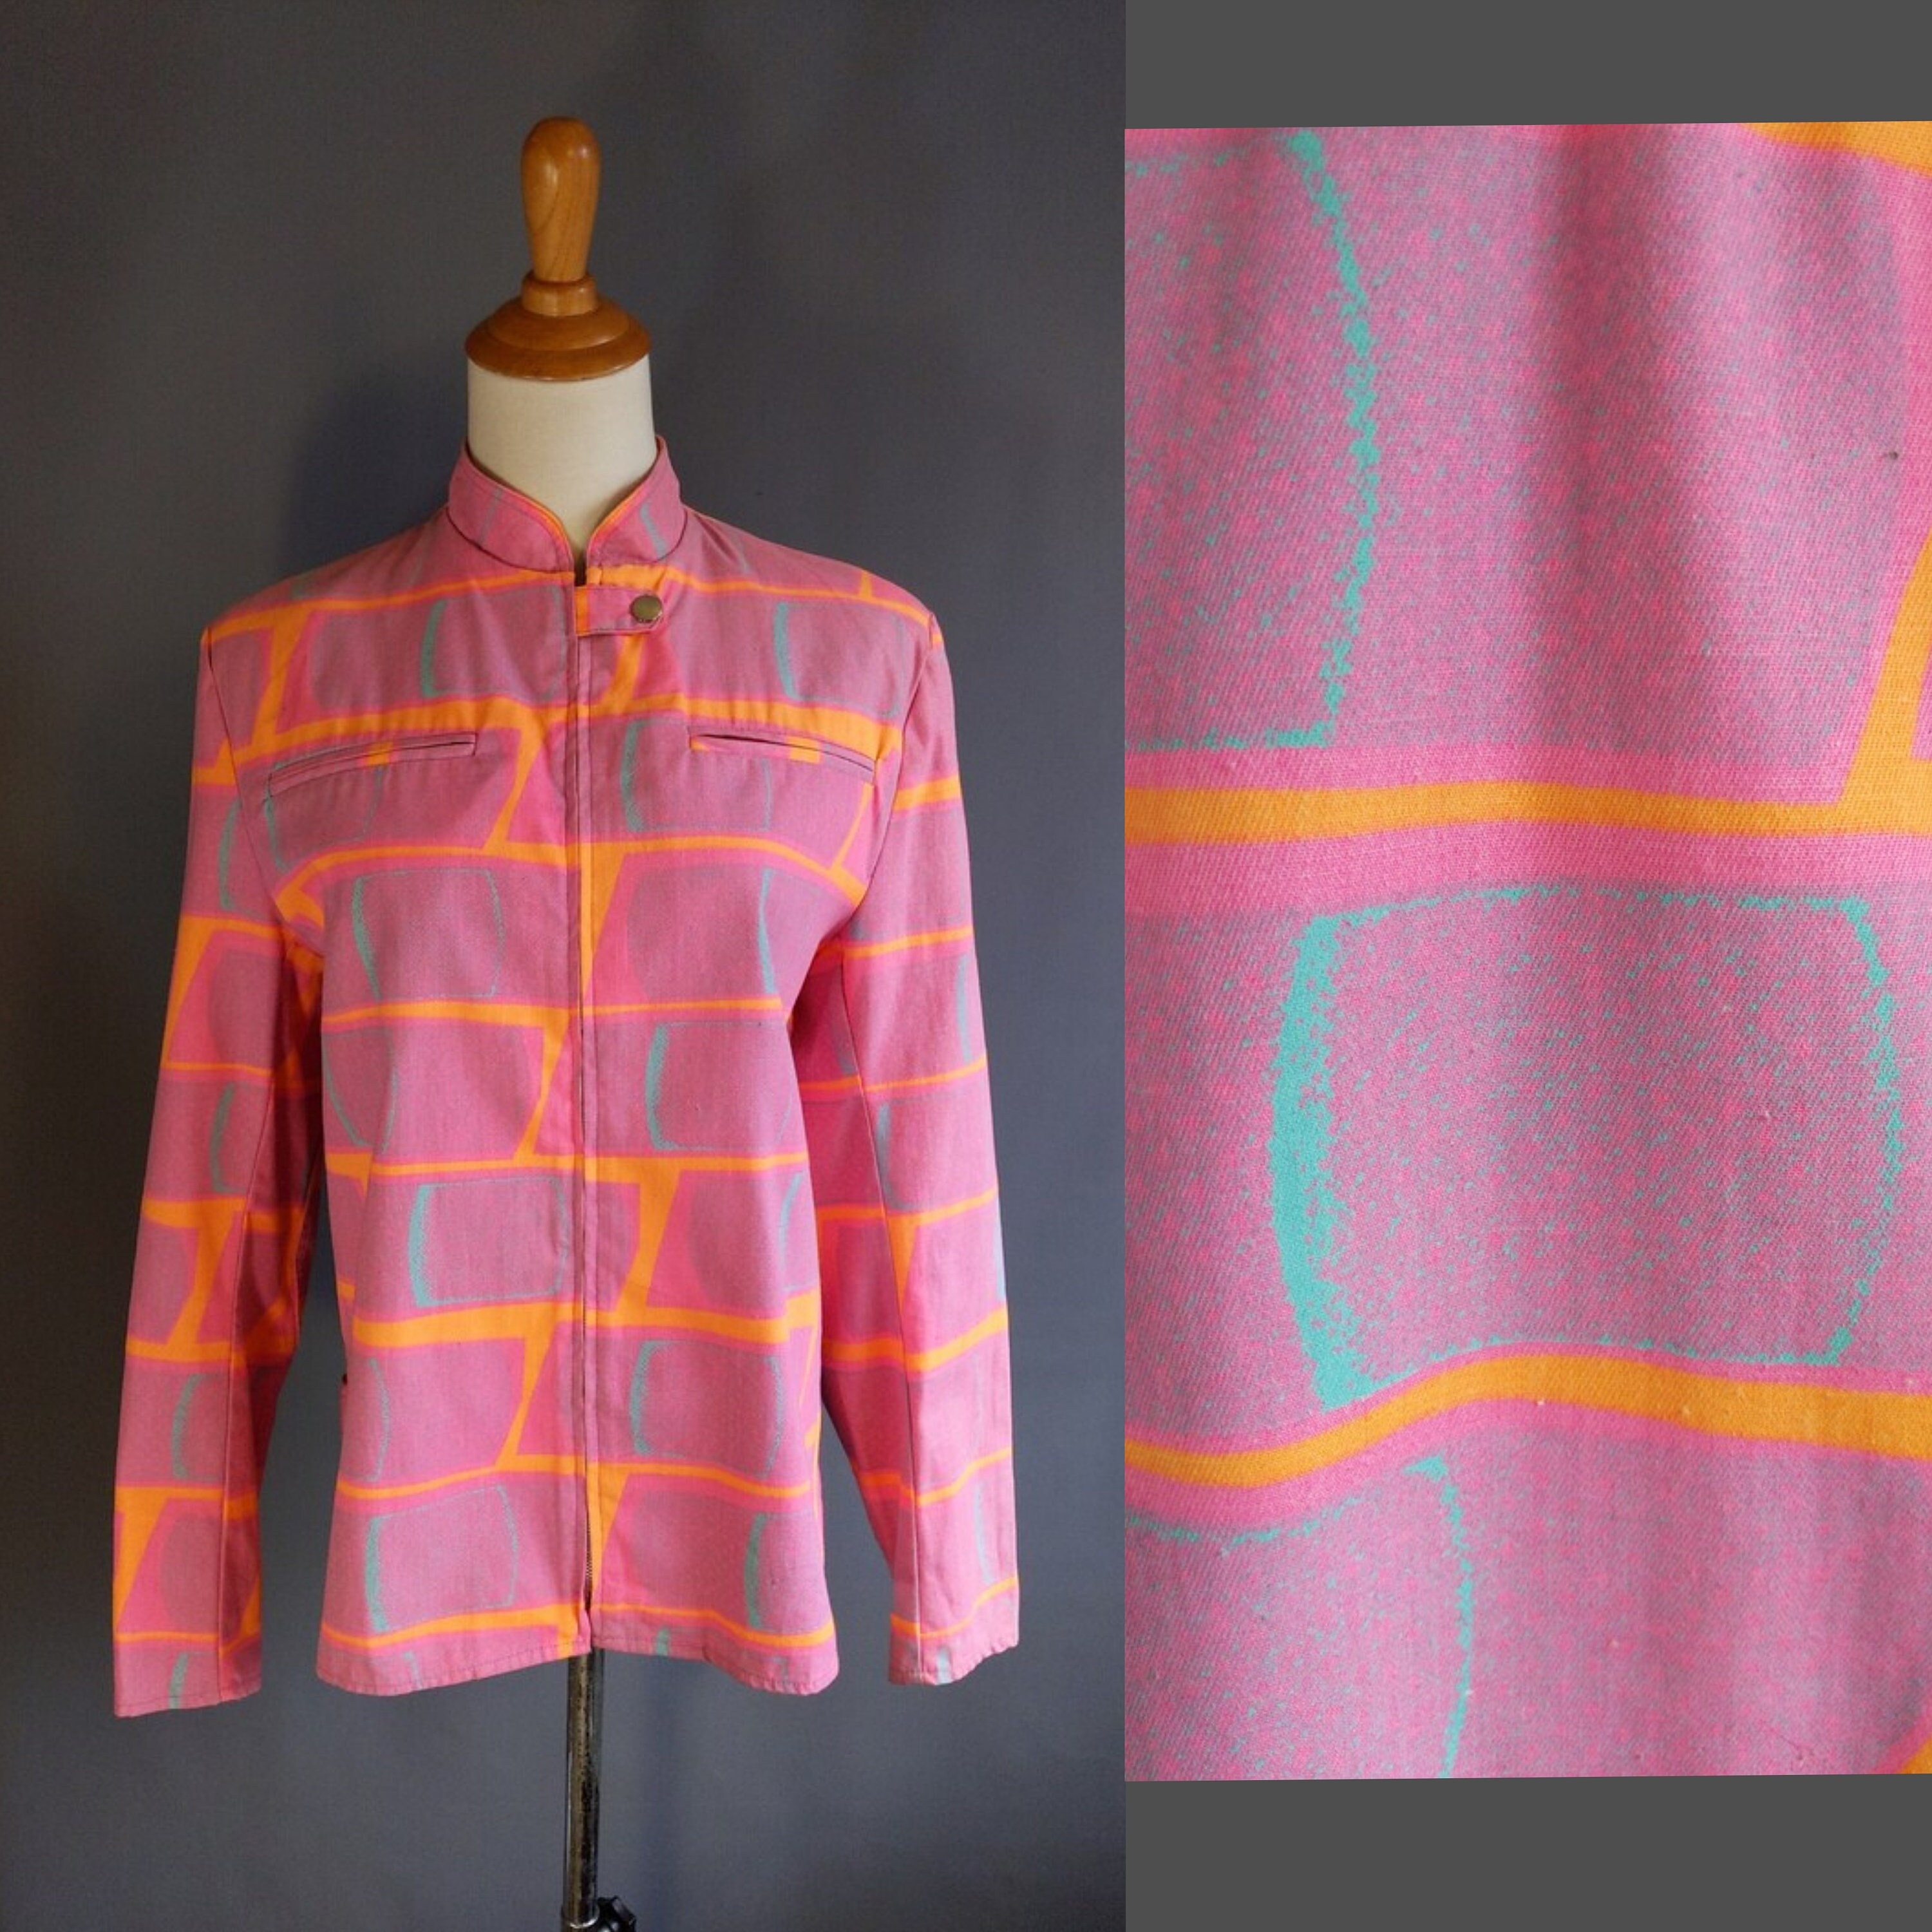 VTG 80's RARE Stephen Sprouse Abstract Print Andy Warhol Jacket (M)